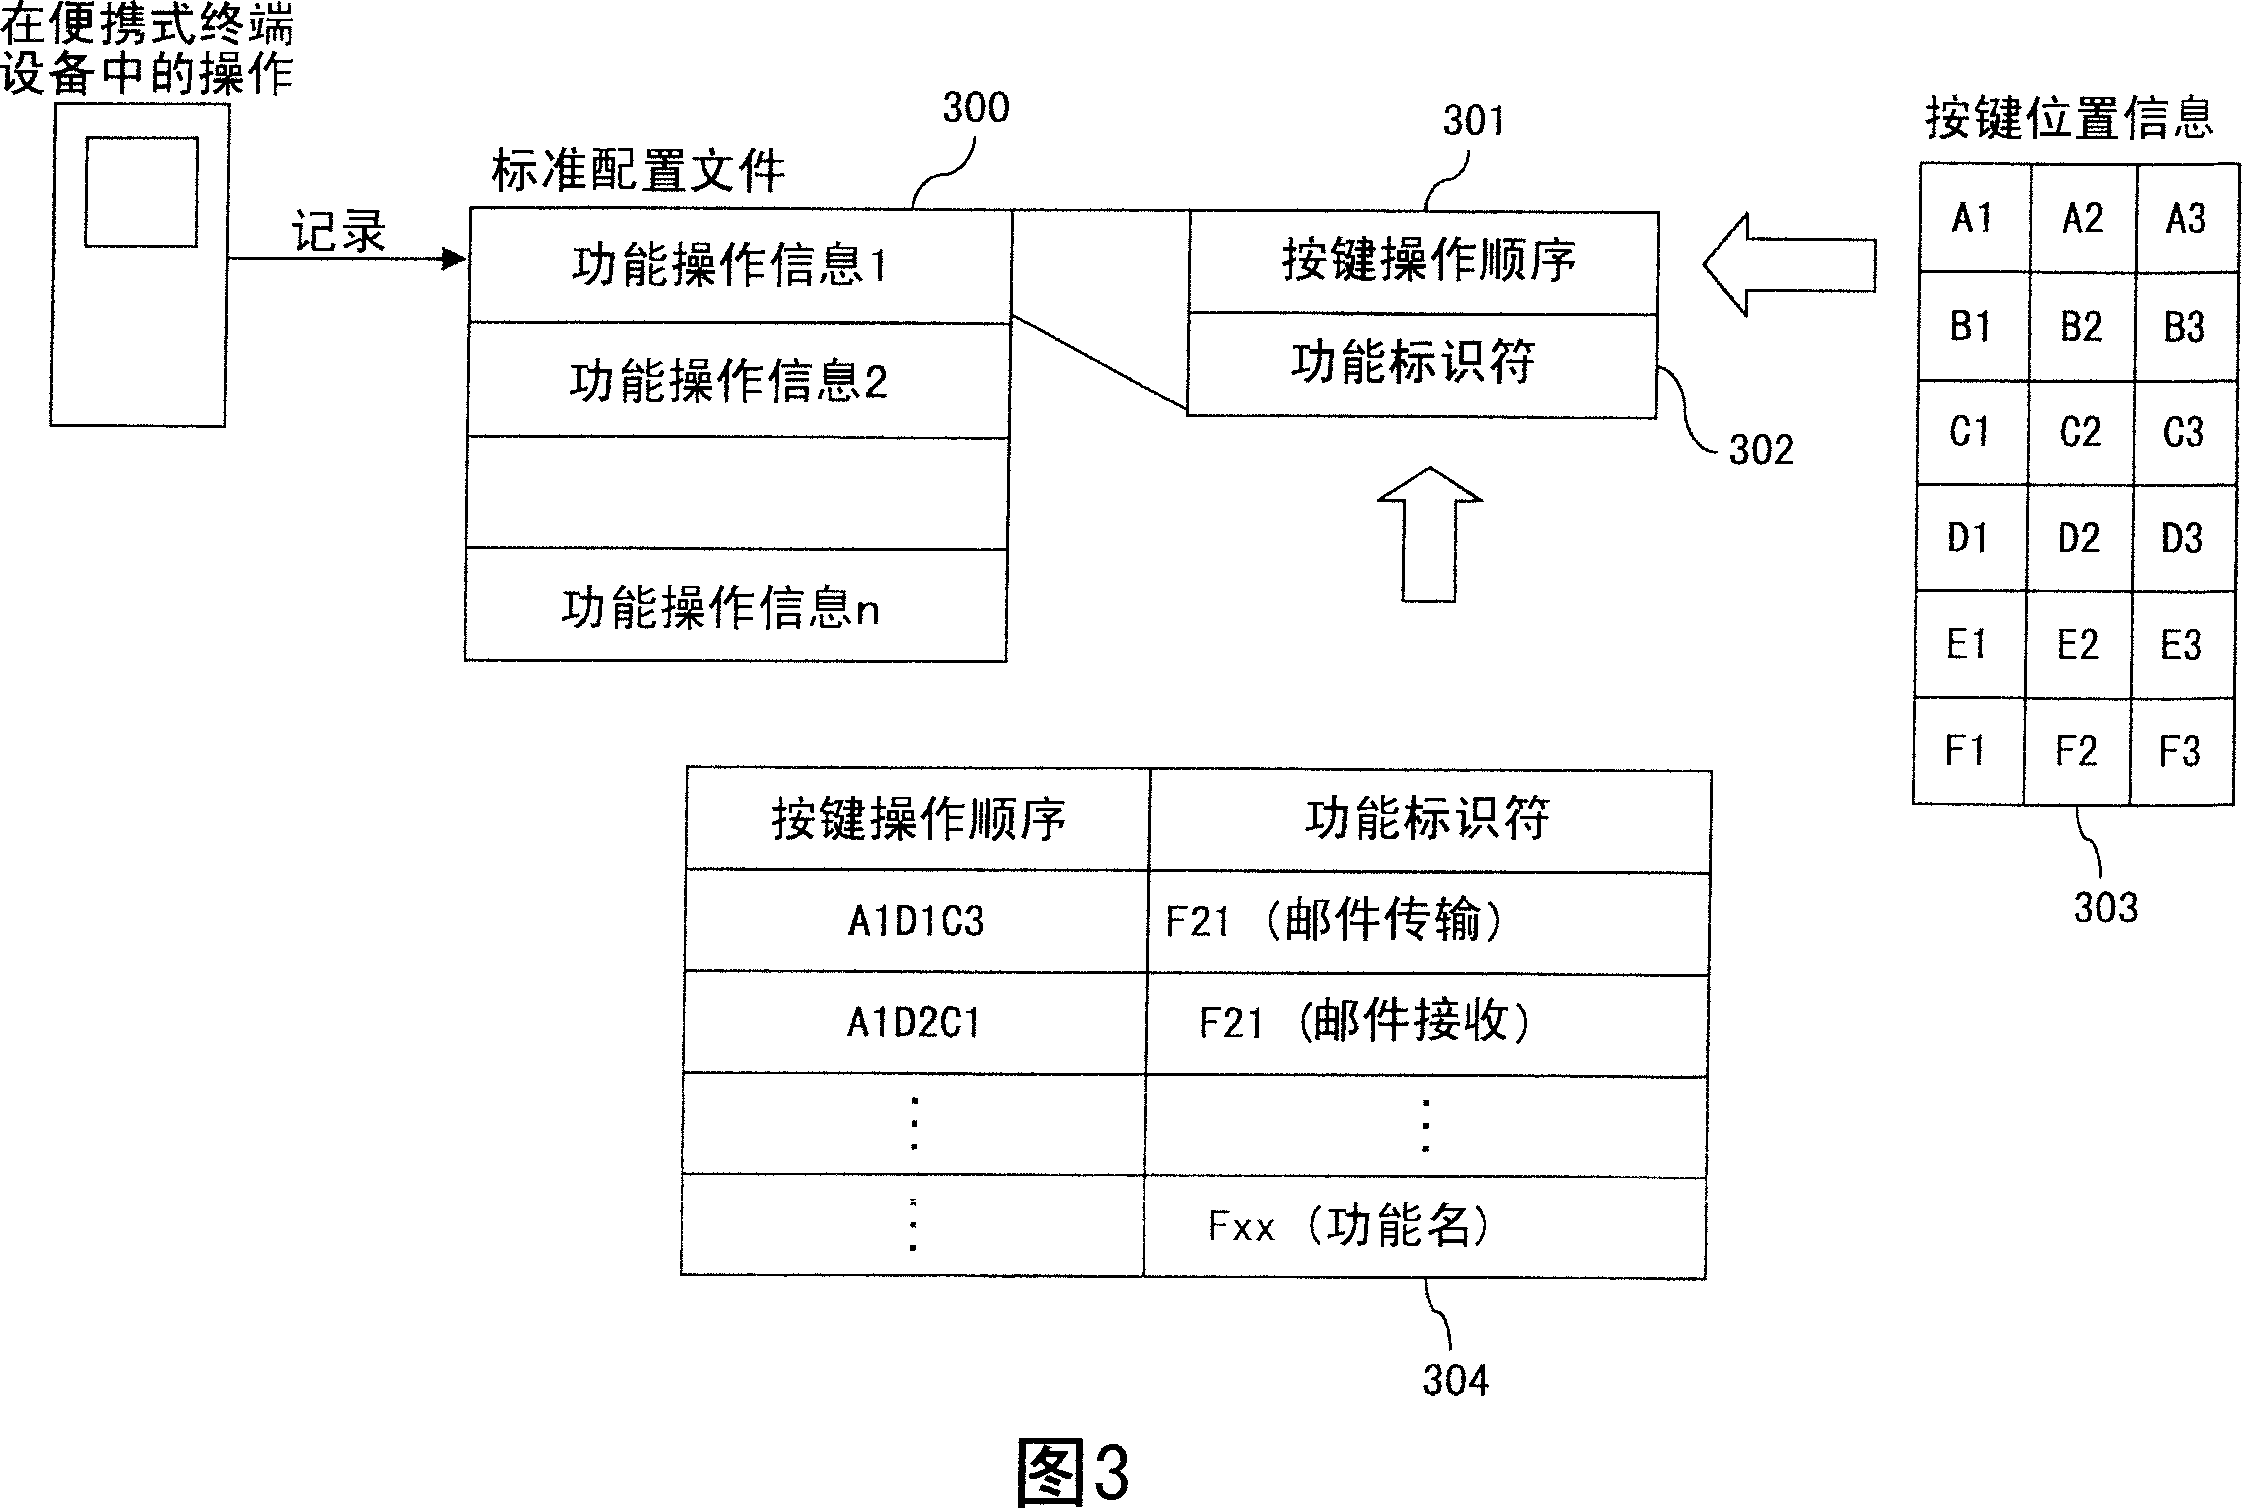 Key assignable portable terminal device